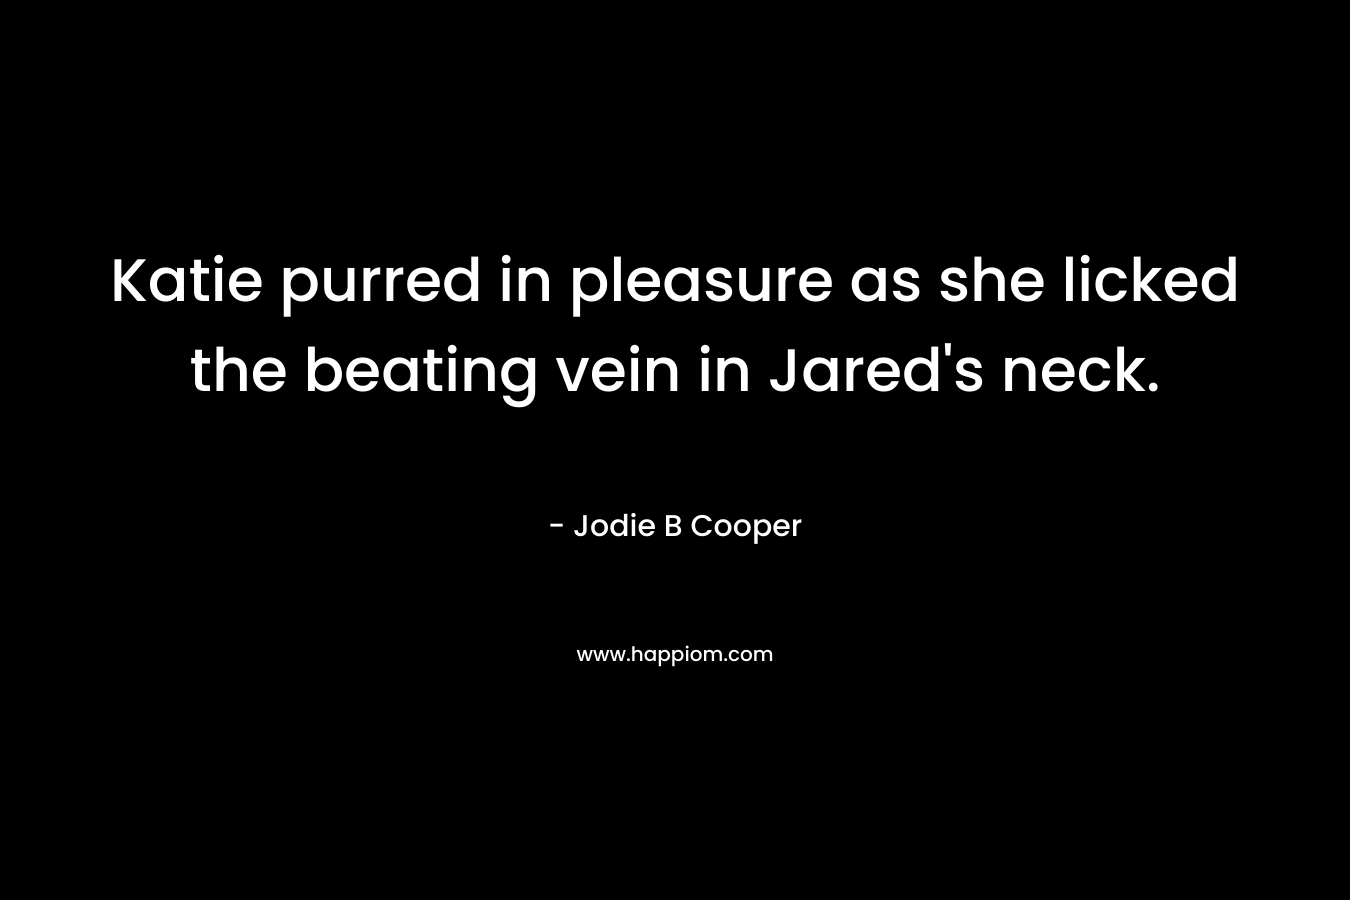 Katie purred in pleasure as she licked the beating vein in Jared’s neck. – Jodie B Cooper